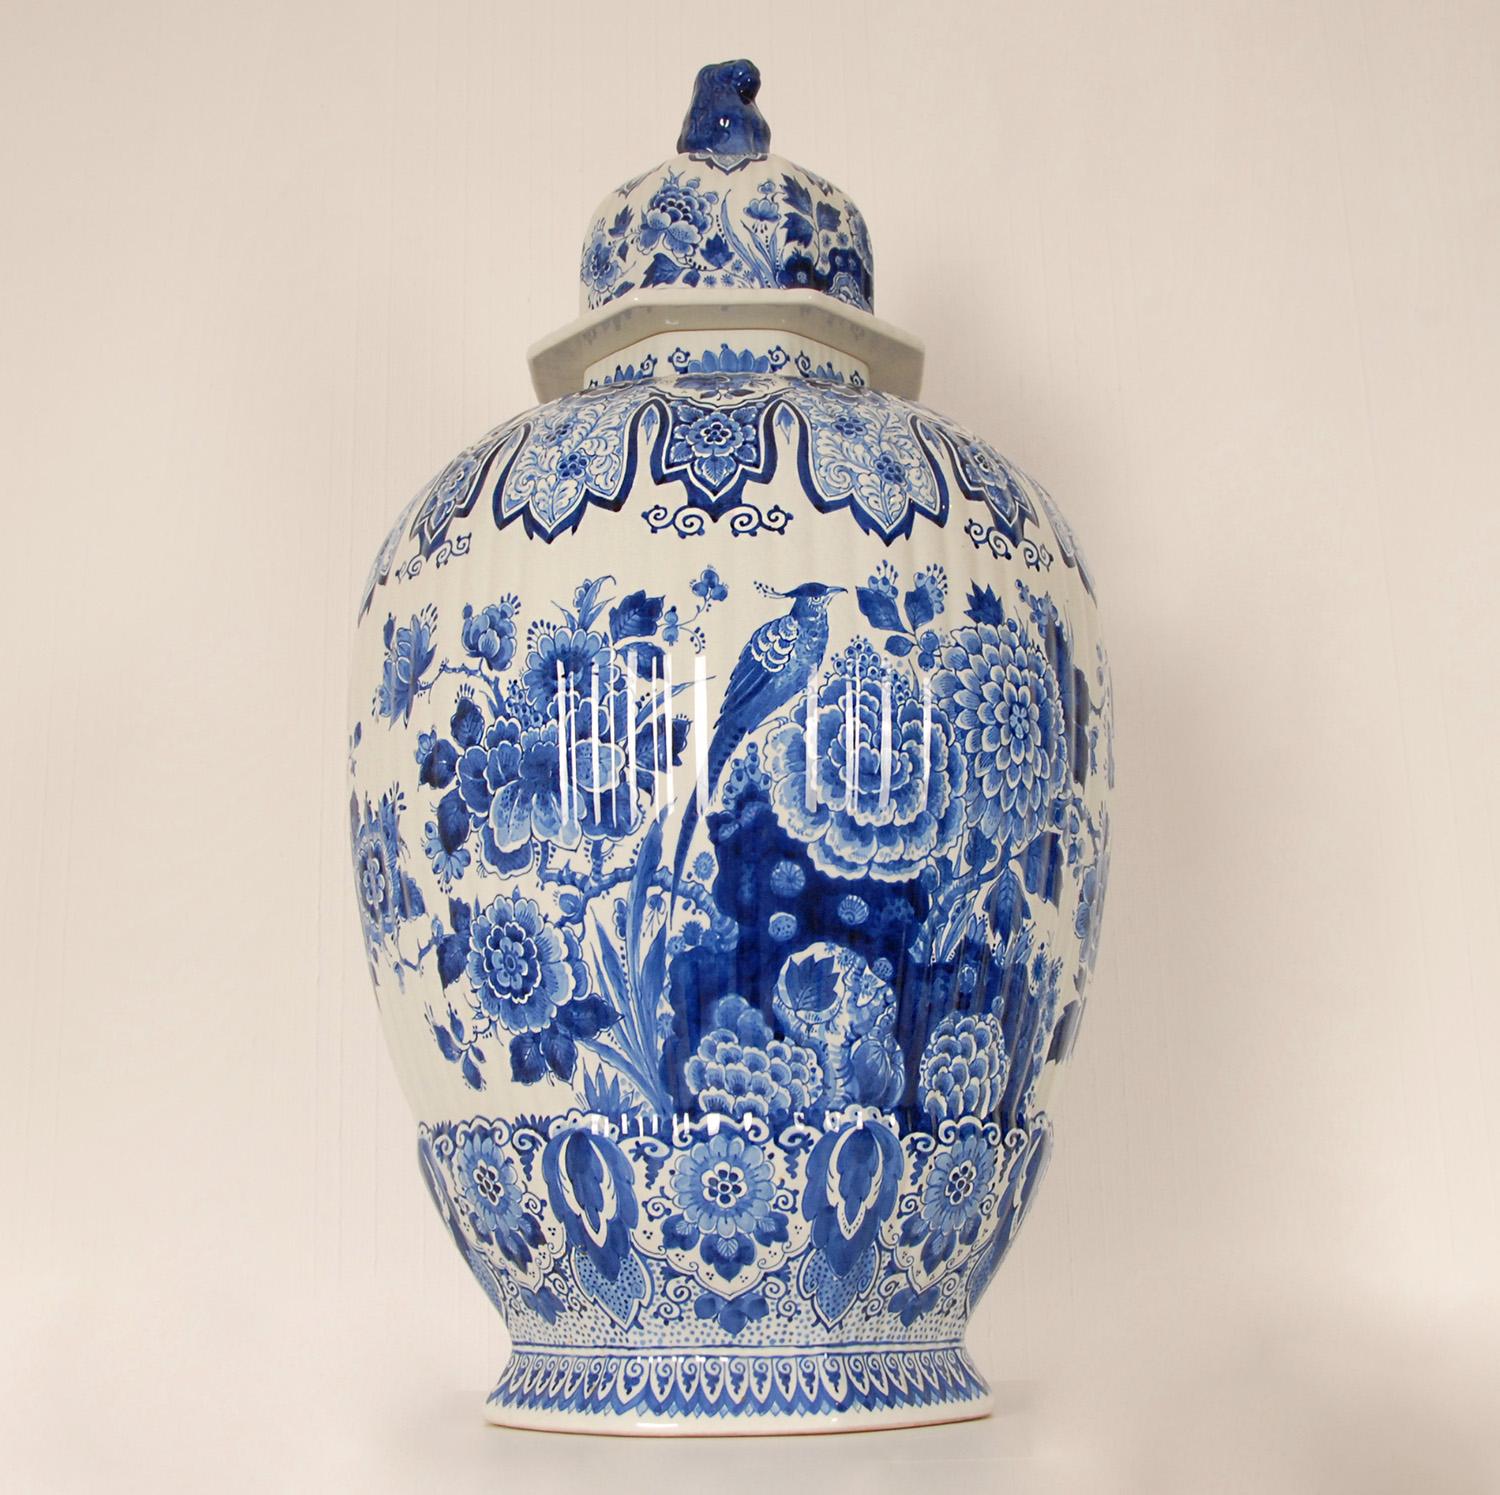 A extremely rare tall ( almost a meter) Dutch Delftware Royal Delft vase - Urn.
Tall decorative covered baluster vase on an octagonal foot.
The vase is hand crafted and hand painted in enchanting blue colors, blue camaieu.
All over floral decoration